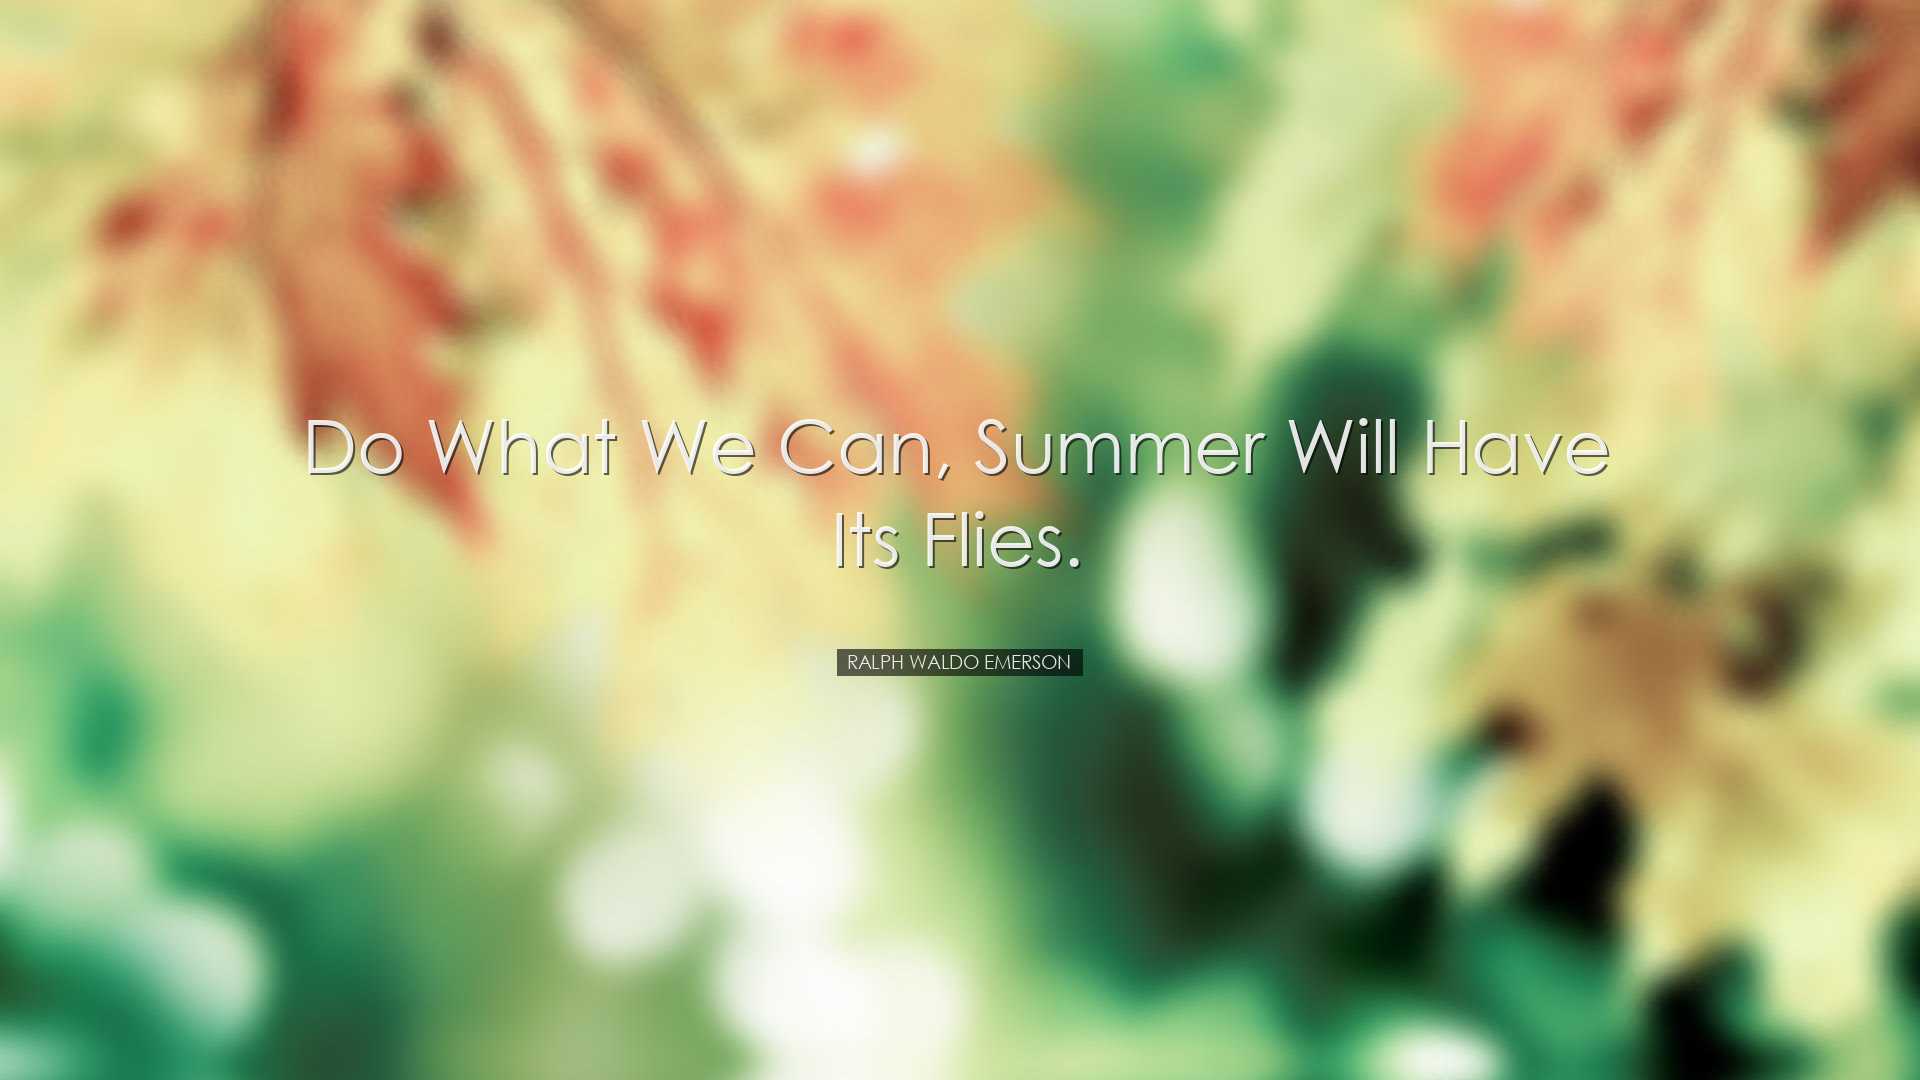 Do what we can, summer will have its flies. - Ralph Waldo Emerson